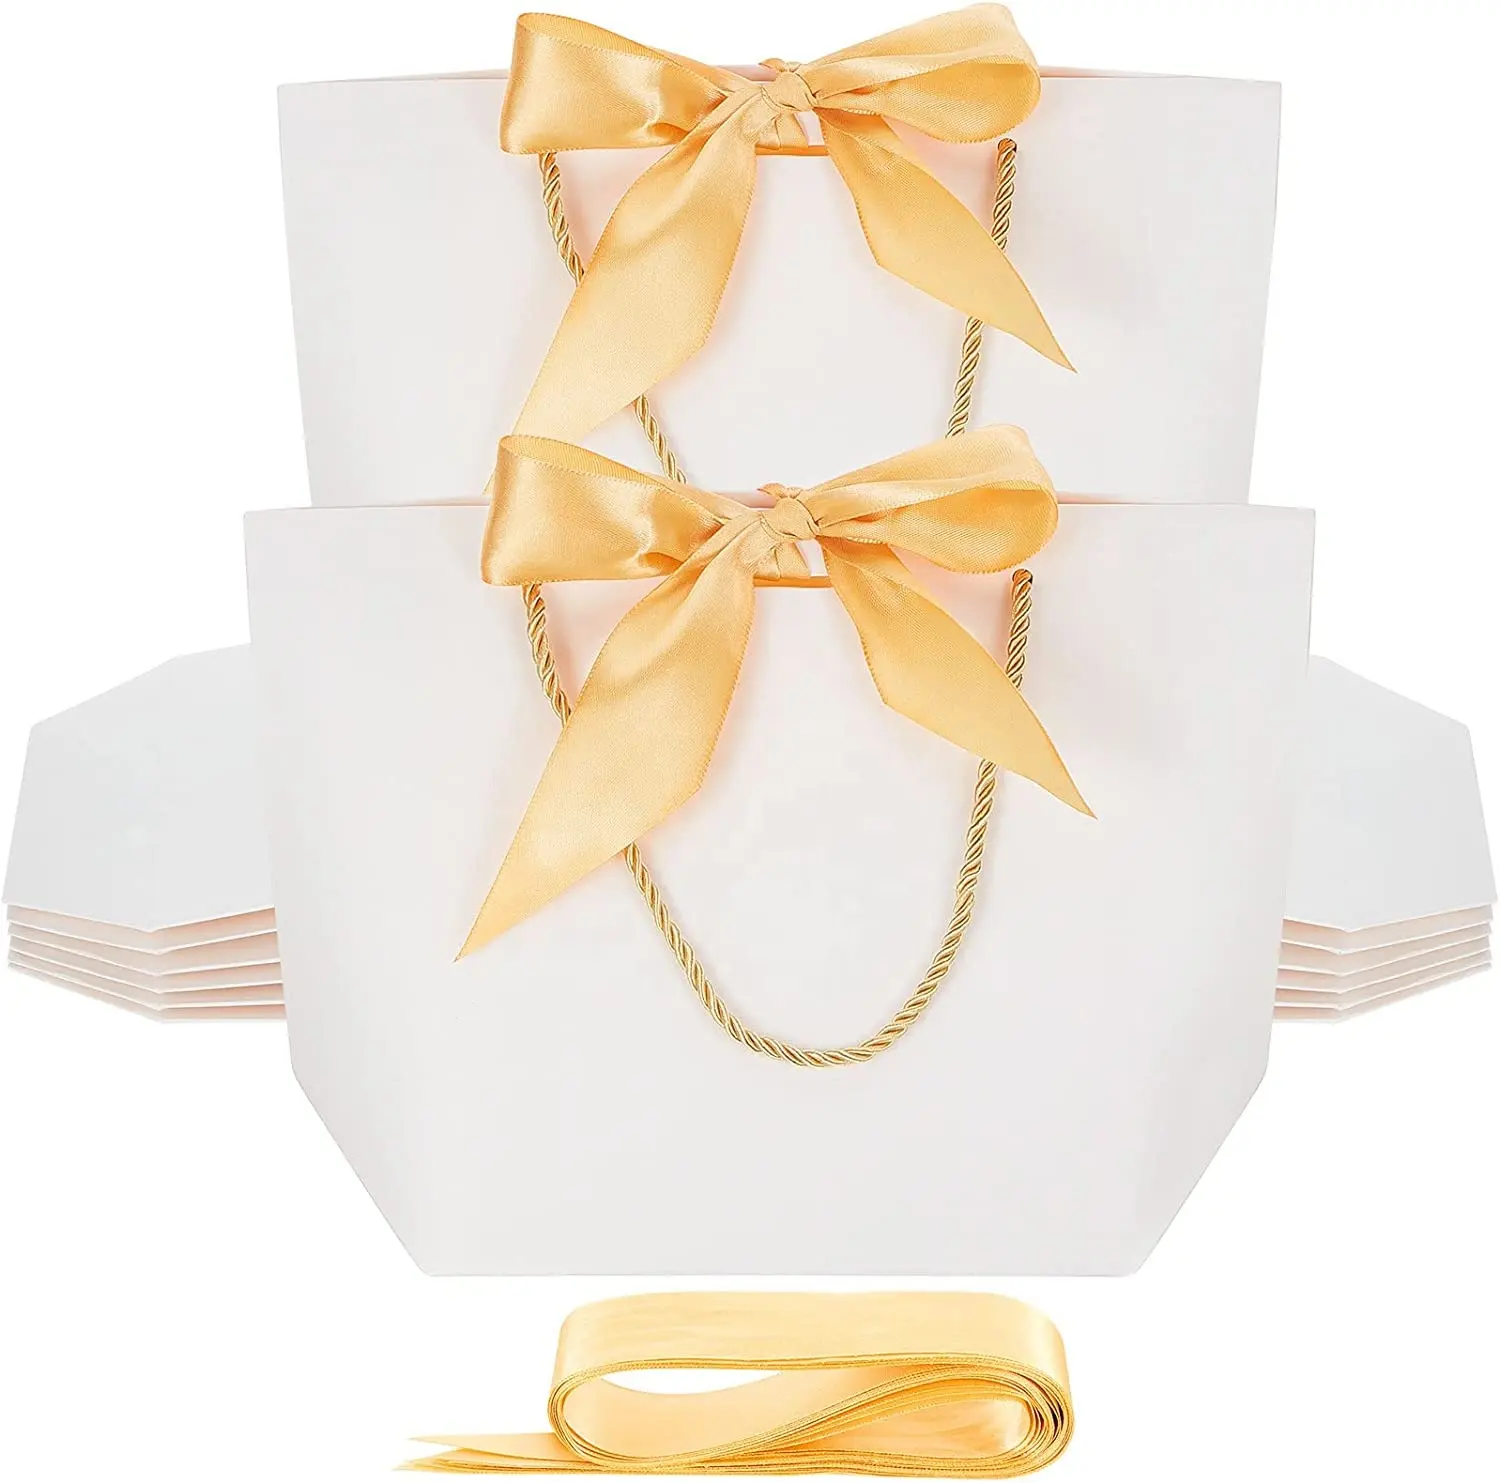 Professional Manufacture White Luxury Thank You Boat Style Resealable Paper Gift Bag With Bow Tie Ribbon For Boutique